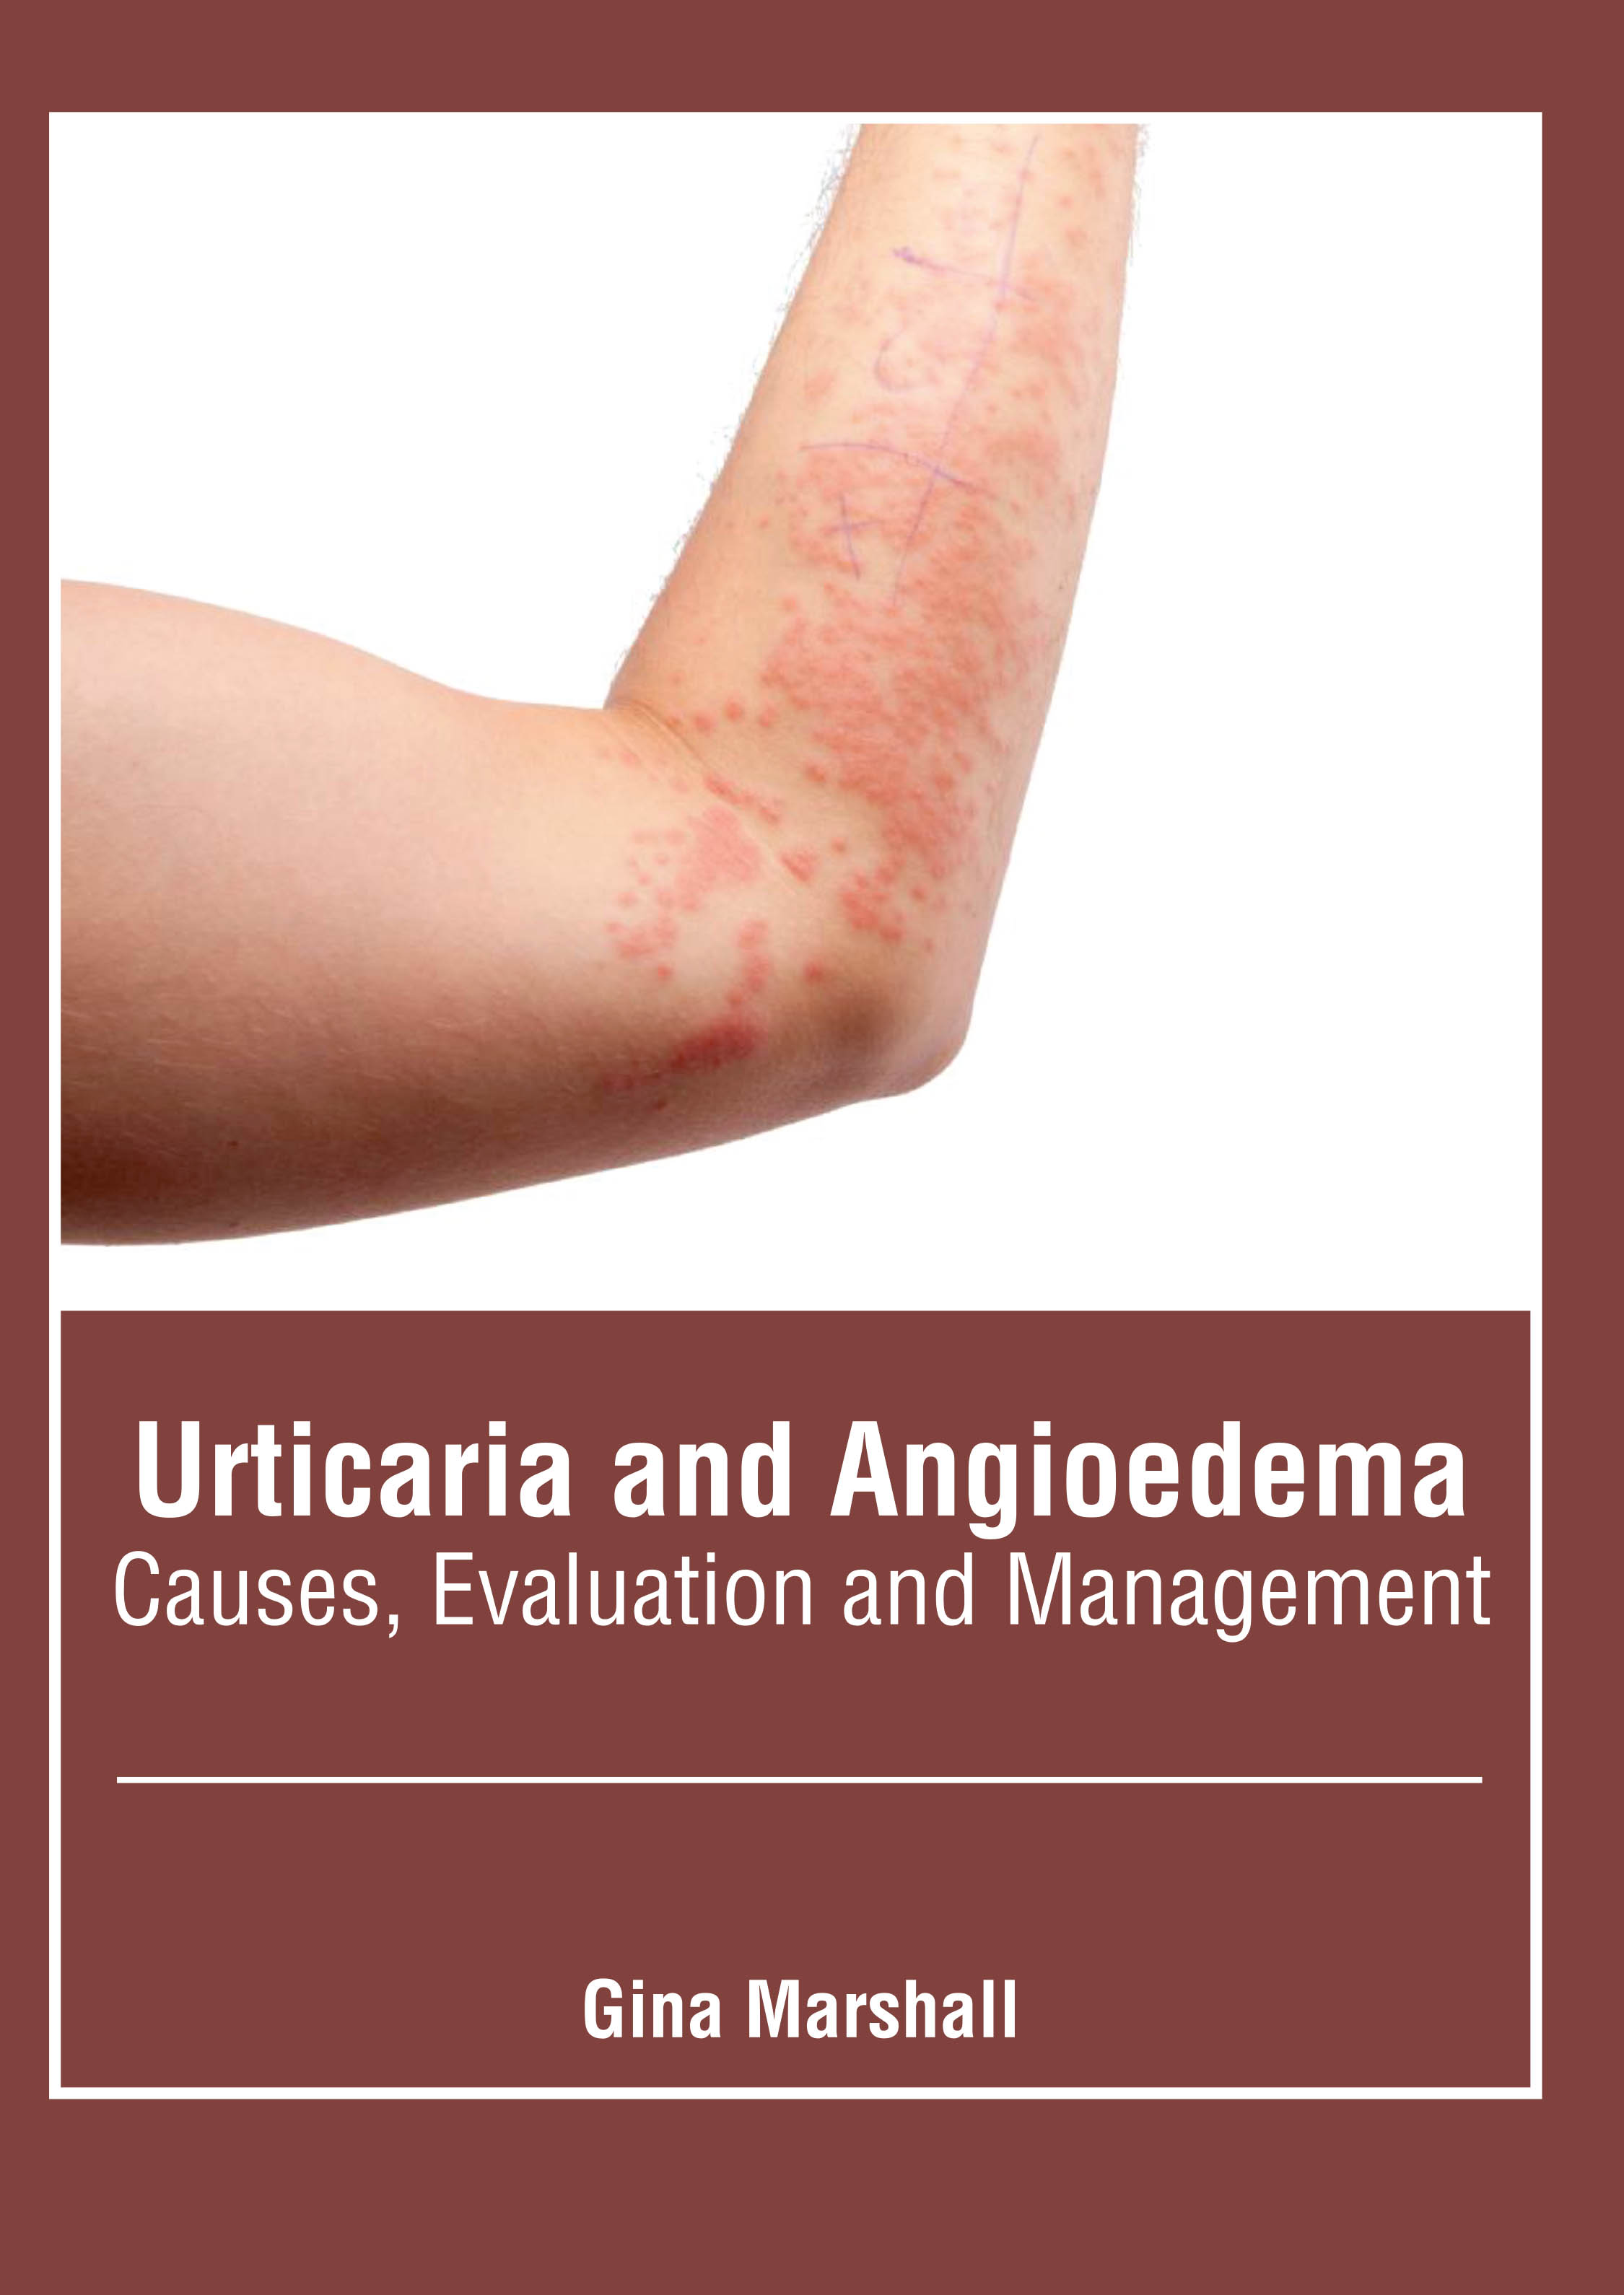 

medical-reference-books/dermatology/urticaria-and-angioedema-causes-evaluation-and-management-9781639270675